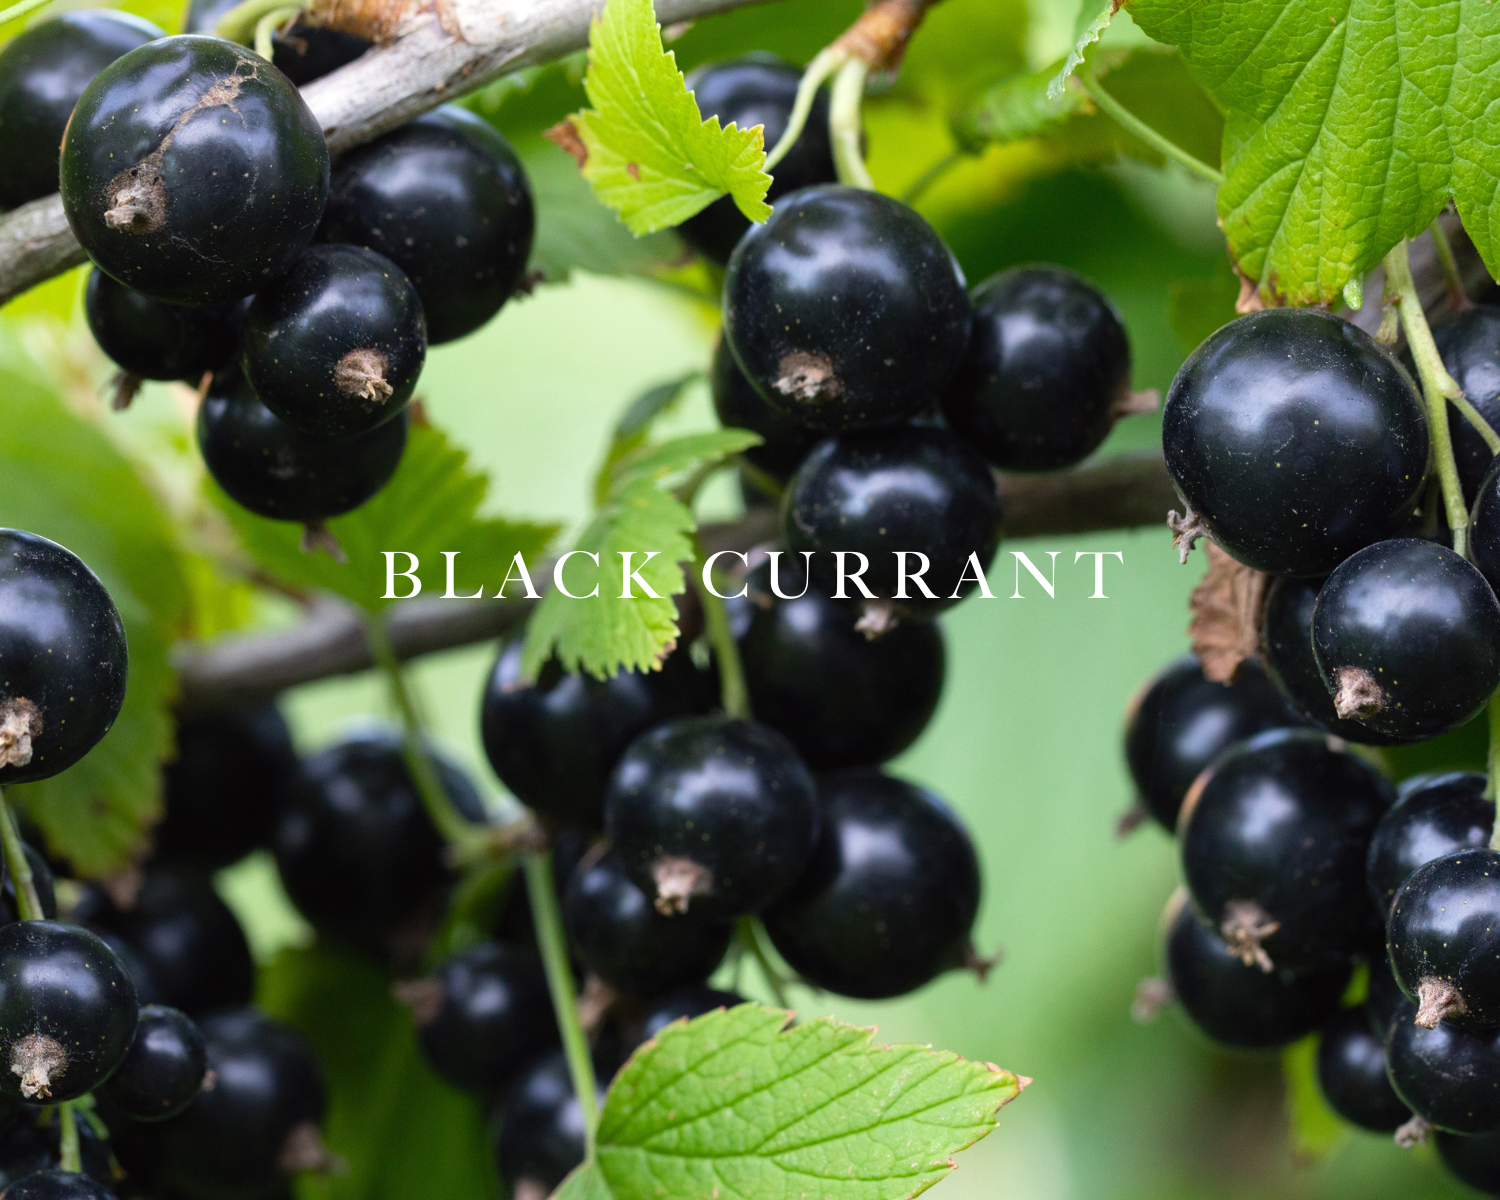 Caswell-Massey Rose Perfume for Women: image showing black currants to represent one of the scent notes